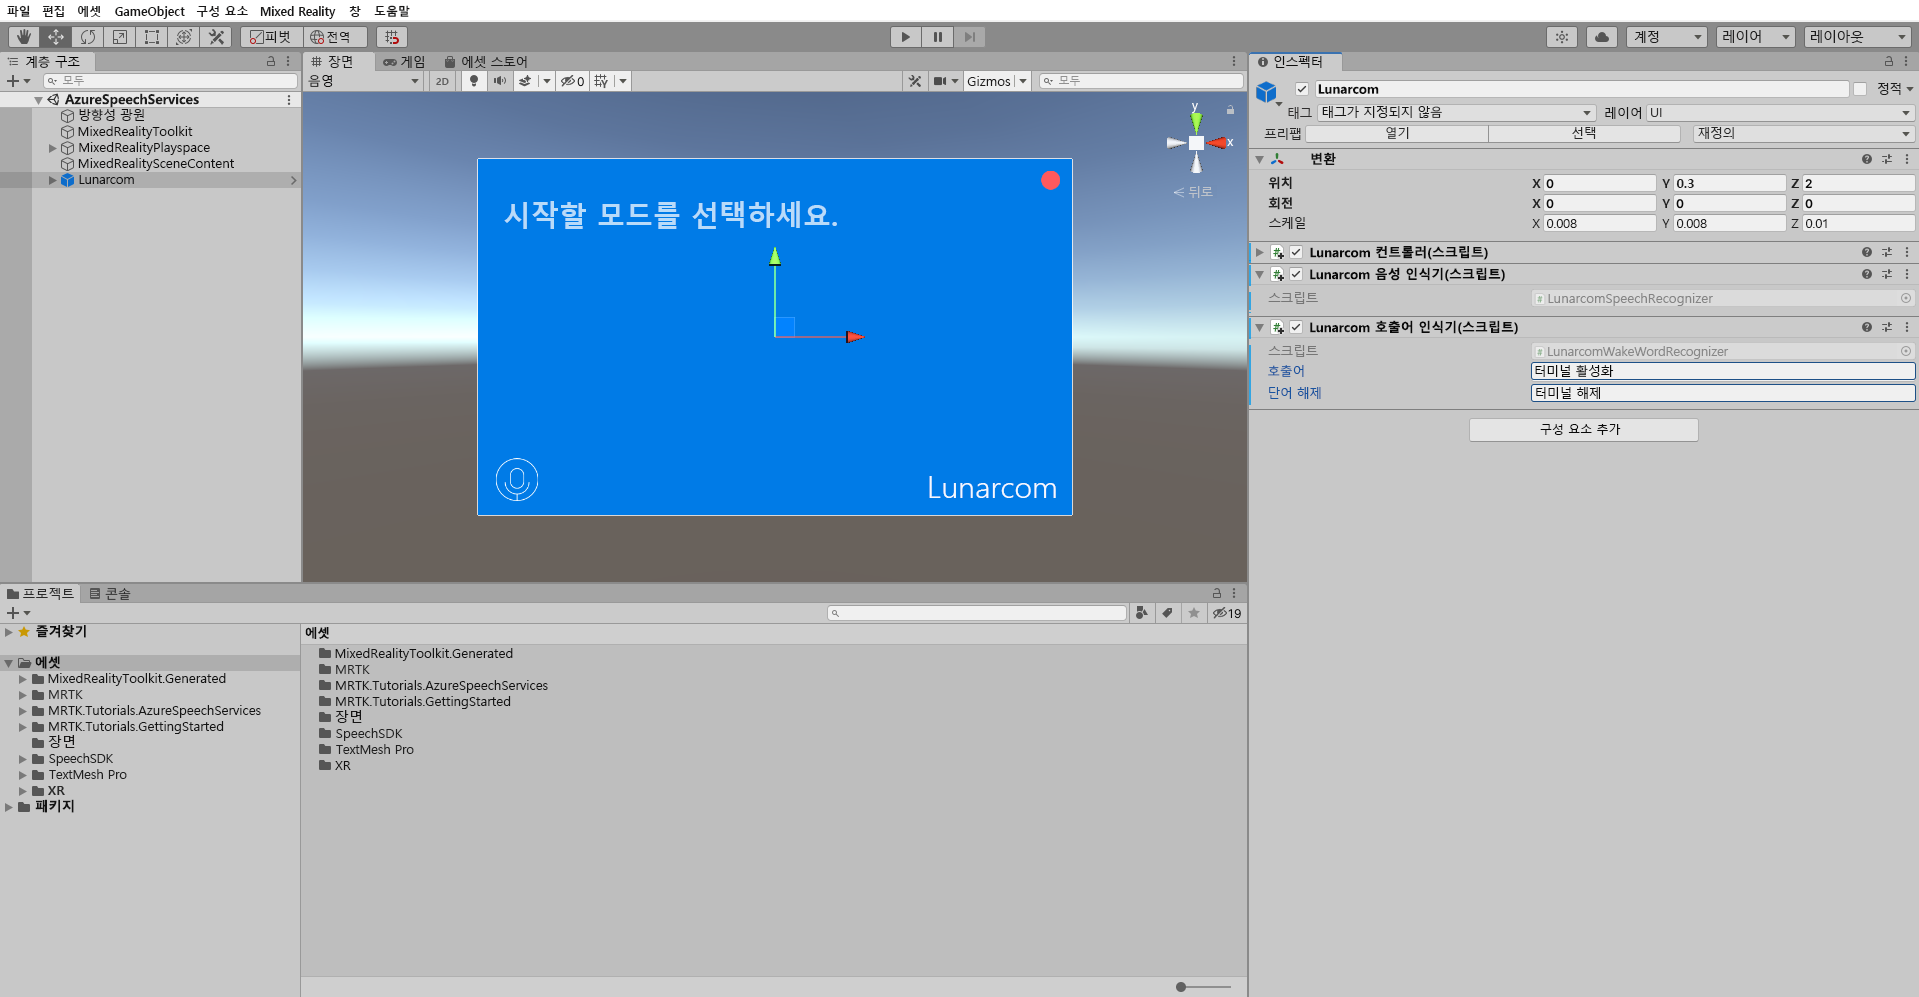 Screenshot of Unity editor with Lunarcom Wake Word Recognizer script component highlighted.